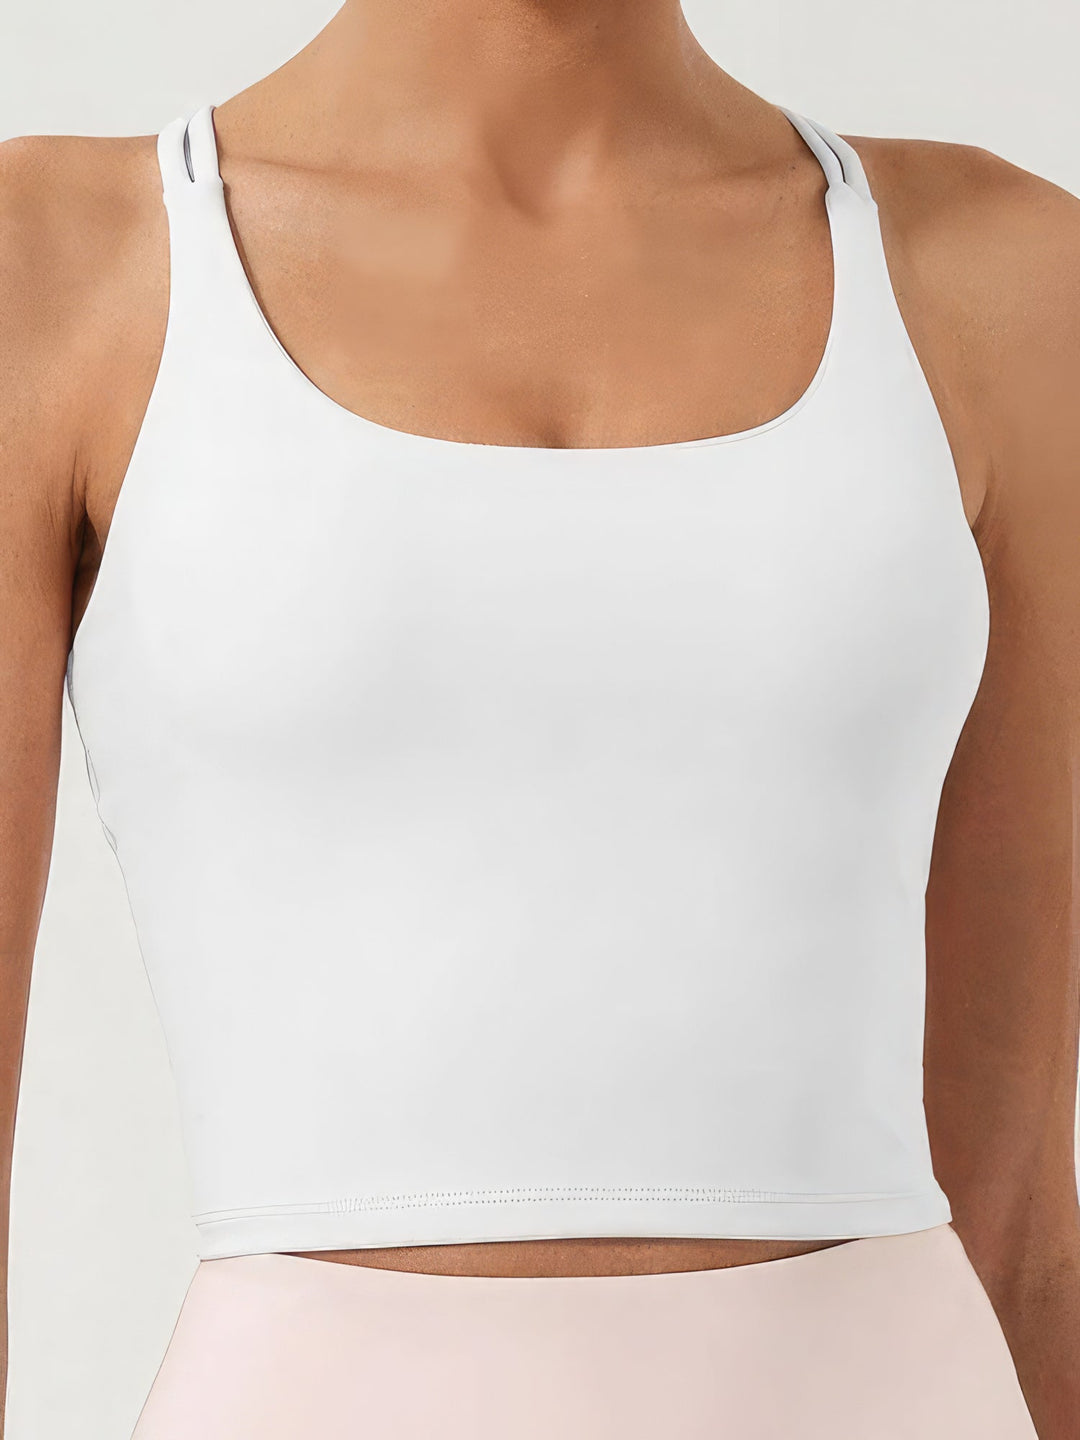 The802Gypsy  Activewear/tops S / white ❤GYPSY LOVE-Criss-Cross Back Sports Tank Top